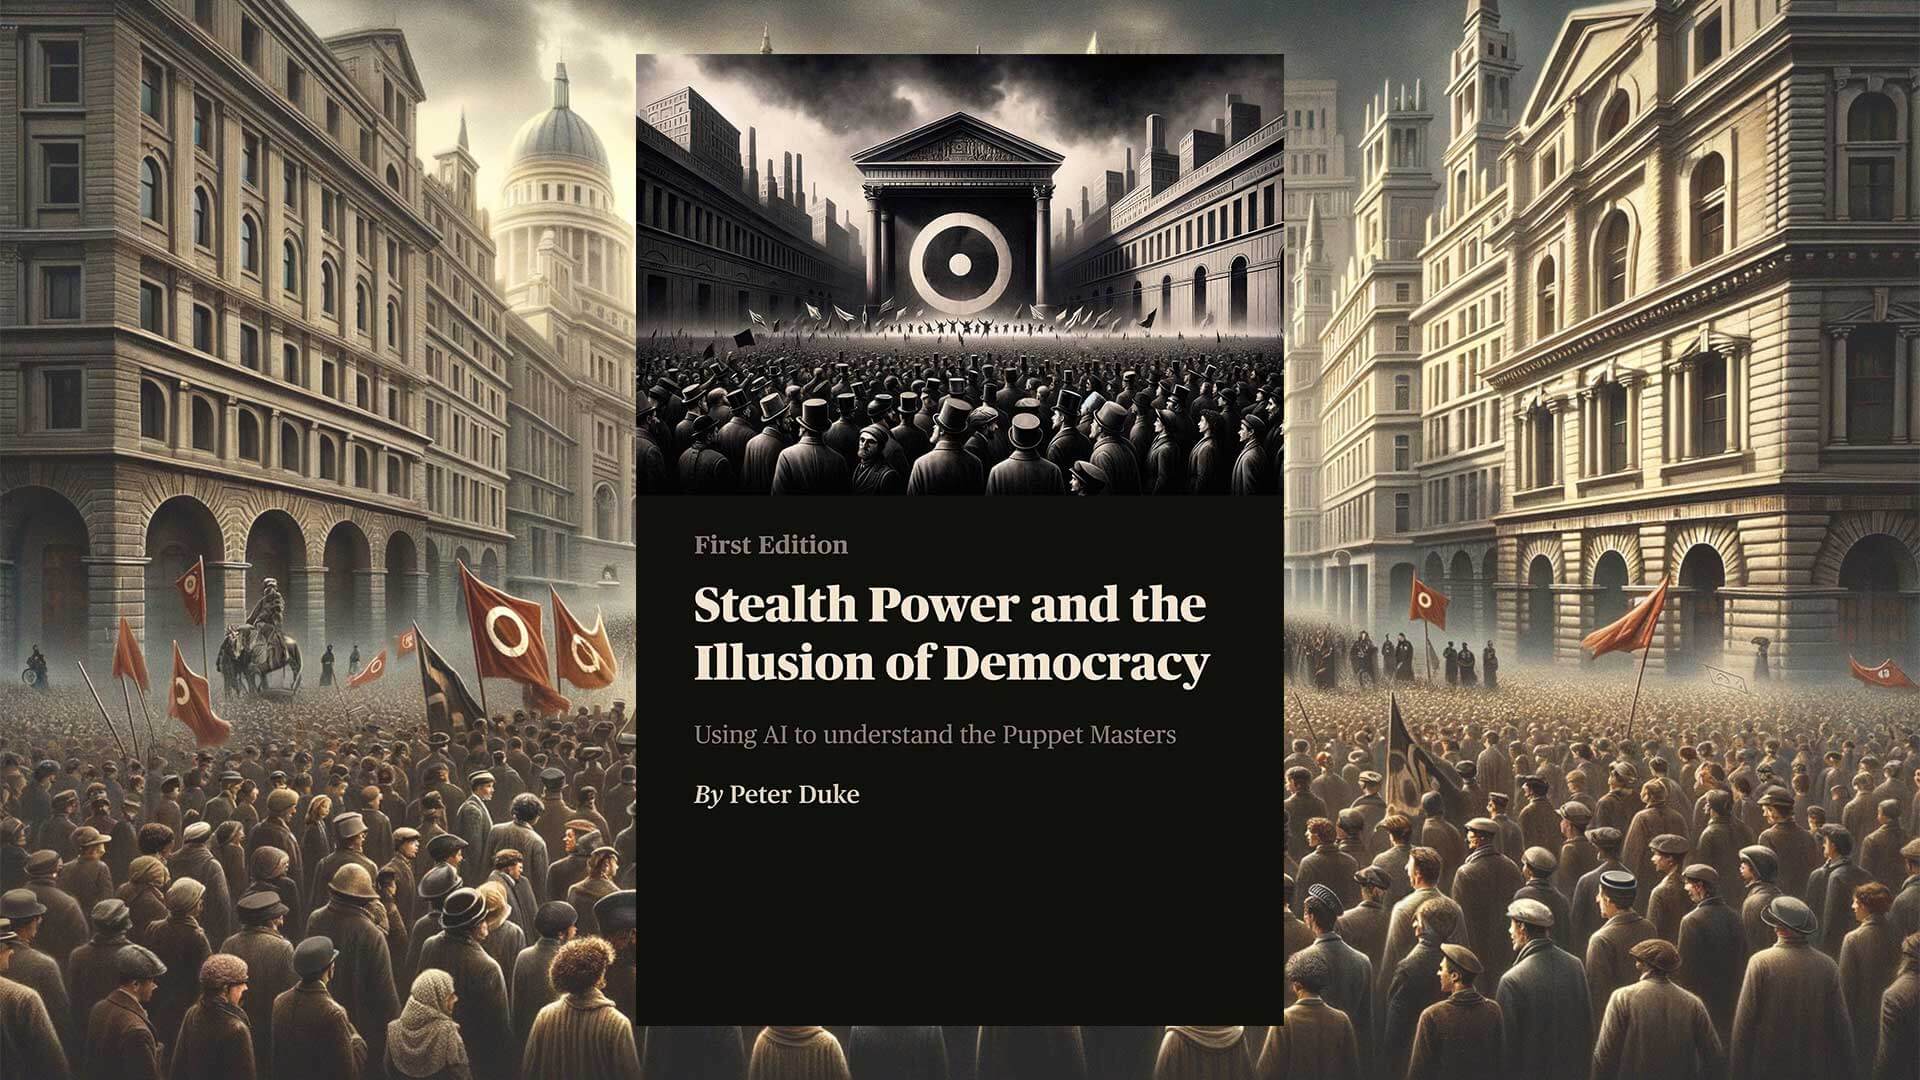 Stealth Power and the Illusion of Democracy by Peter Duke